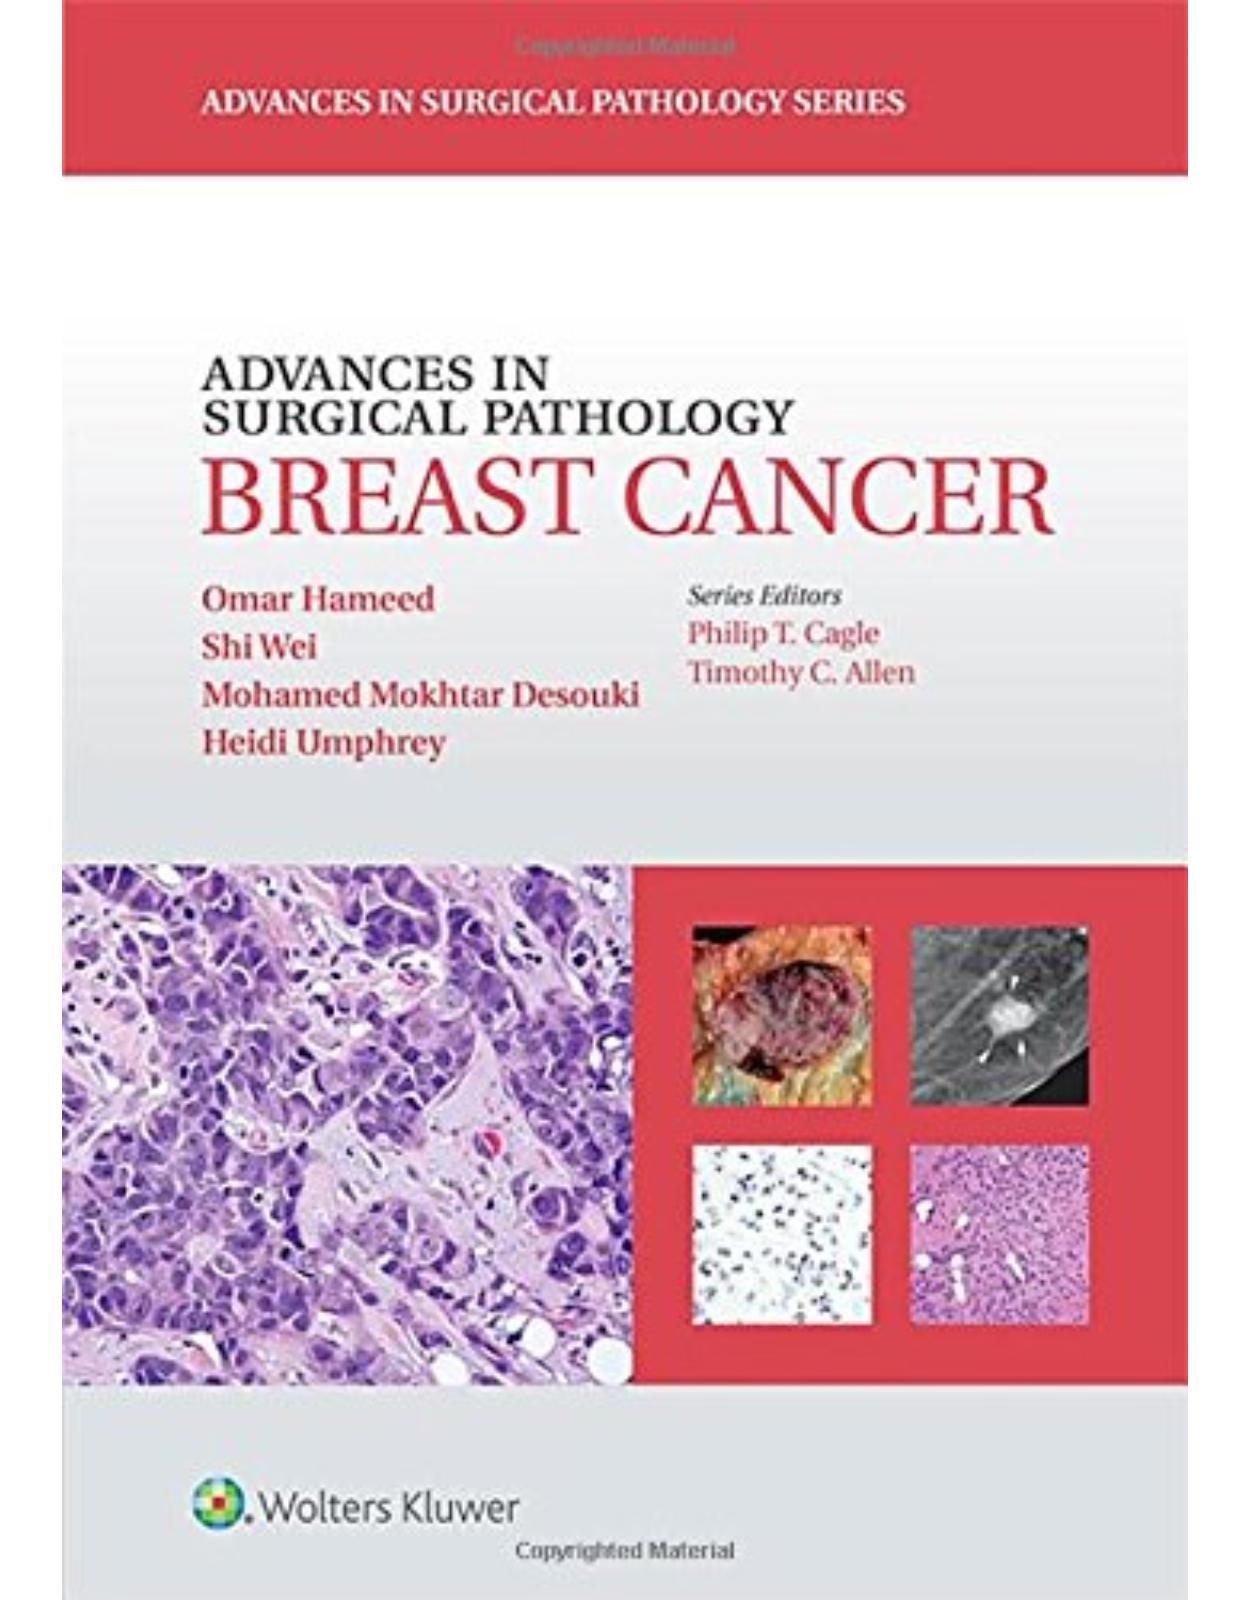 Advances in Surgical Pathology: Breast Cancer